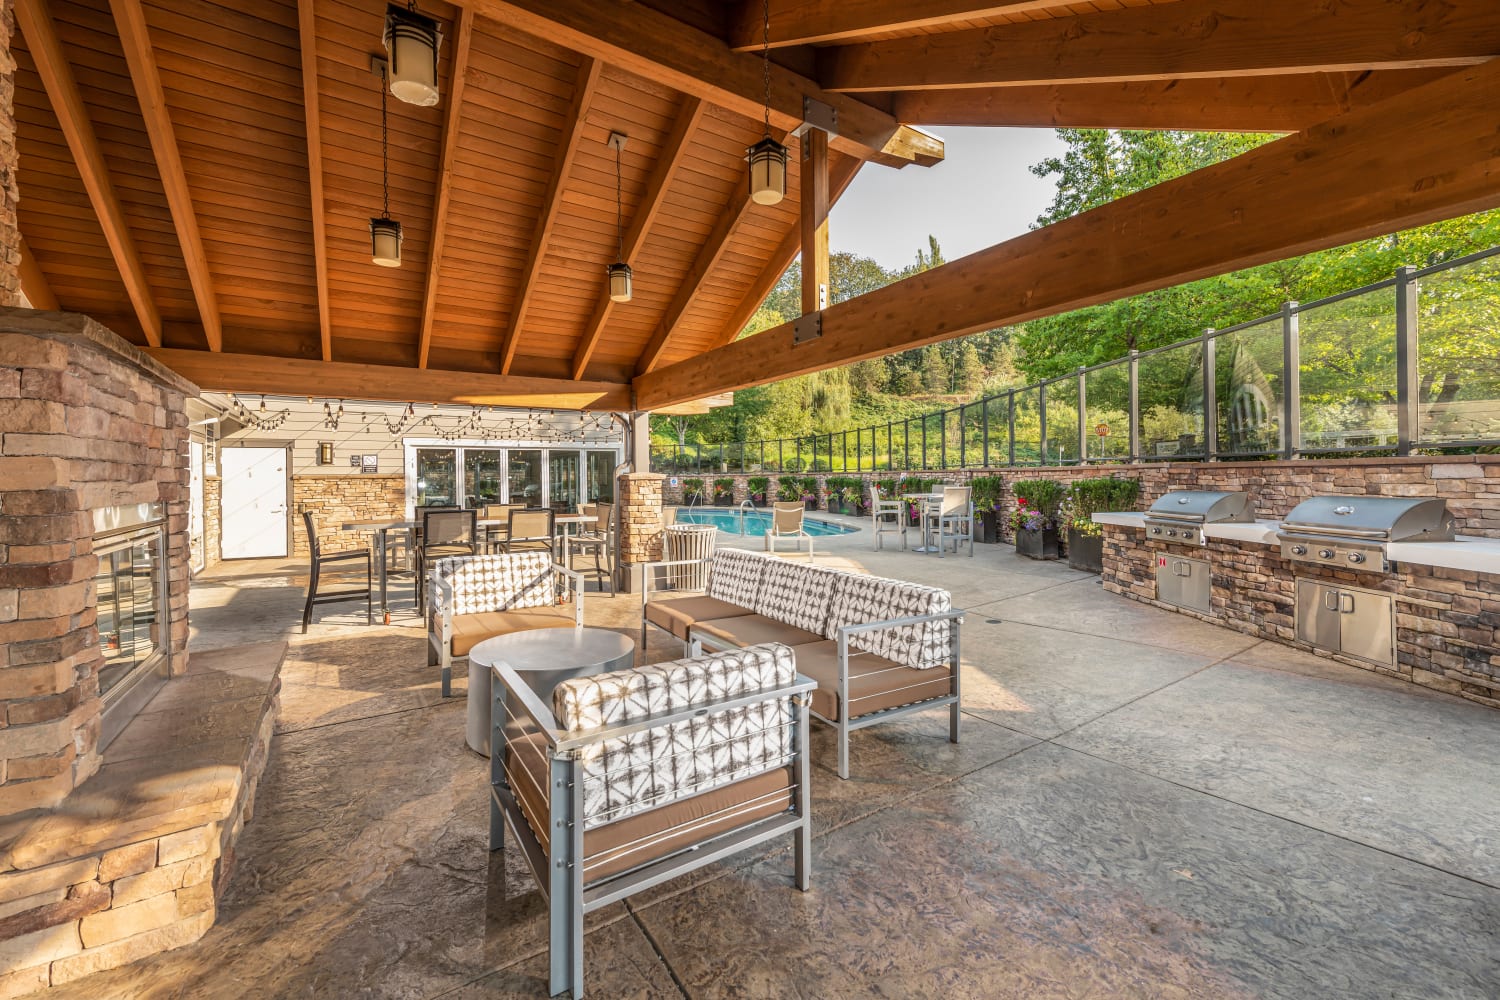 Outdoor covered barbecue area and community space at The Preserve at Forbes Creek in Kirkland, Washington